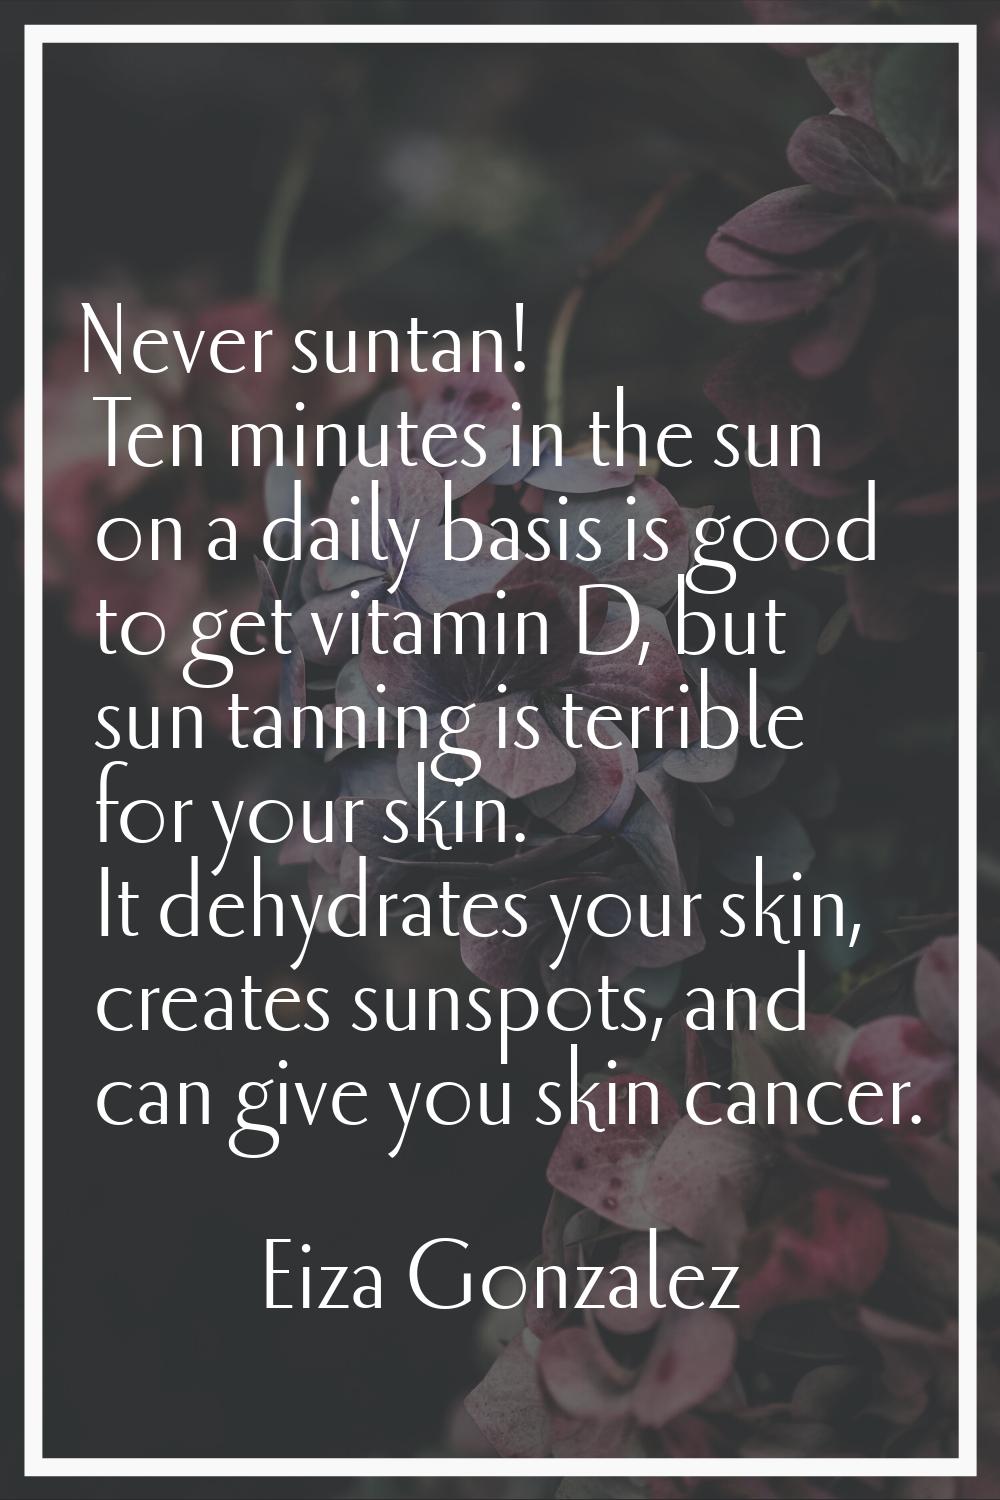 Never suntan! Ten minutes in the sun on a daily basis is good to get vitamin D, but sun tanning is 